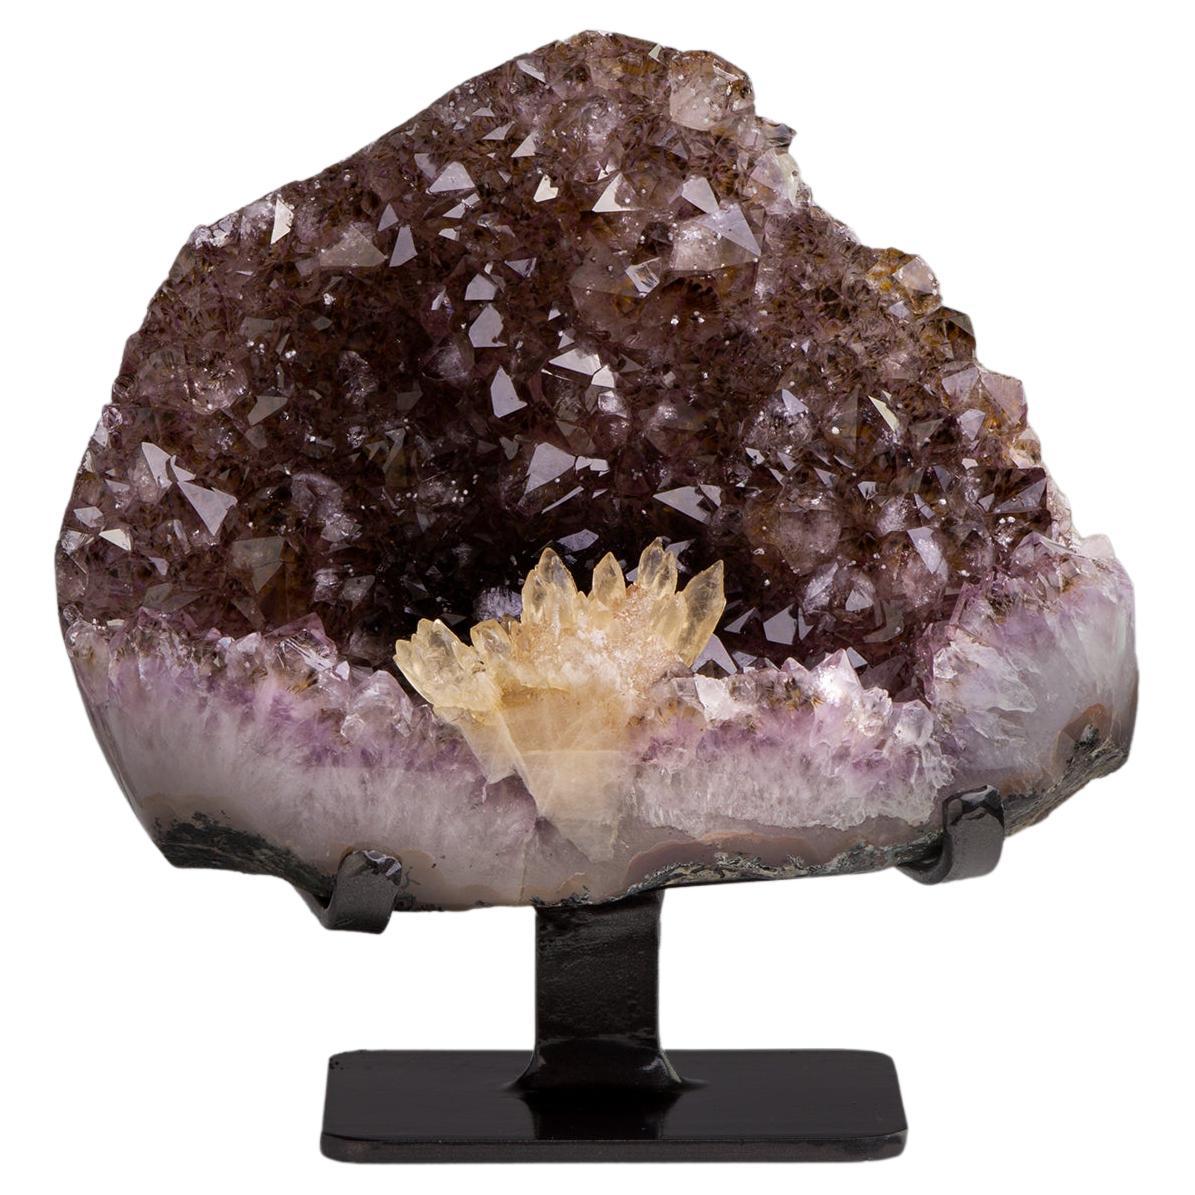 Geode with Orange Brown Crystals and Frontal Calcite Rosette